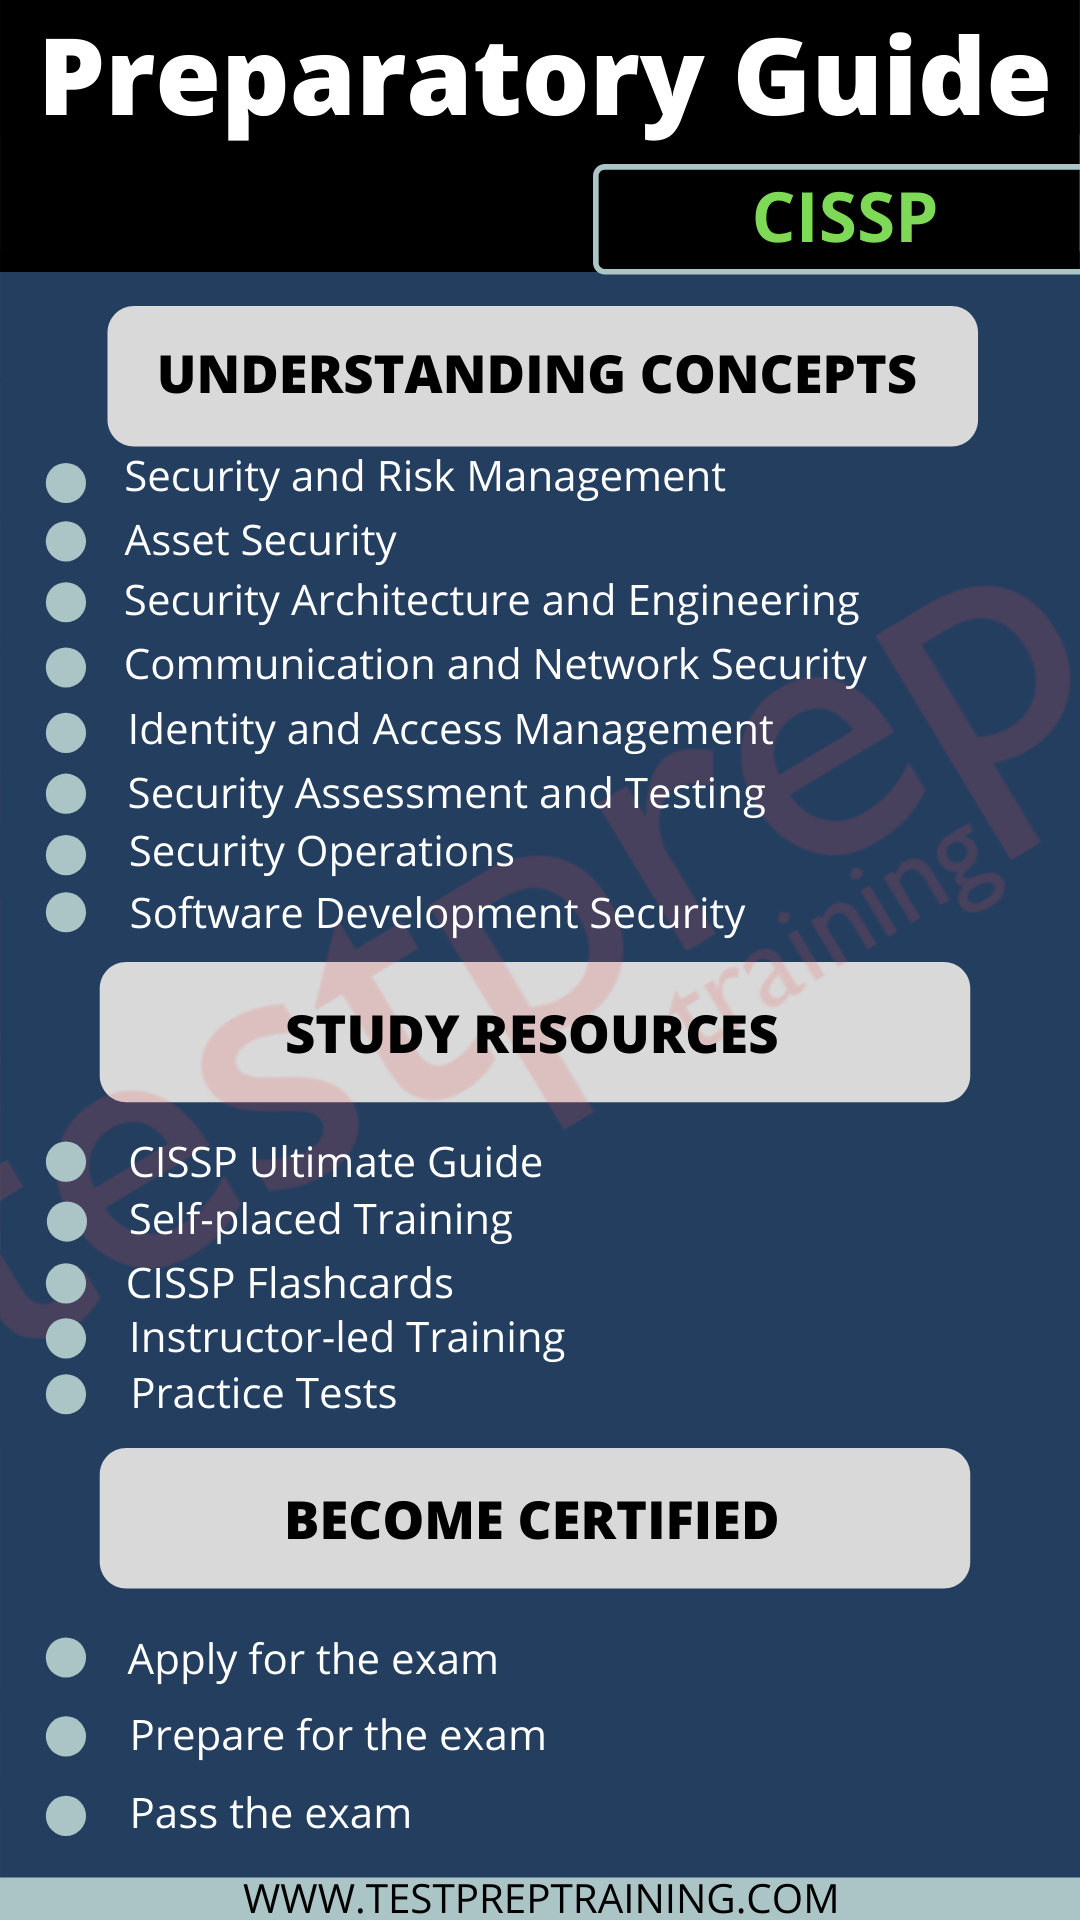 (CISSP) Certified Information Systems Security Professional Preparatory Guide